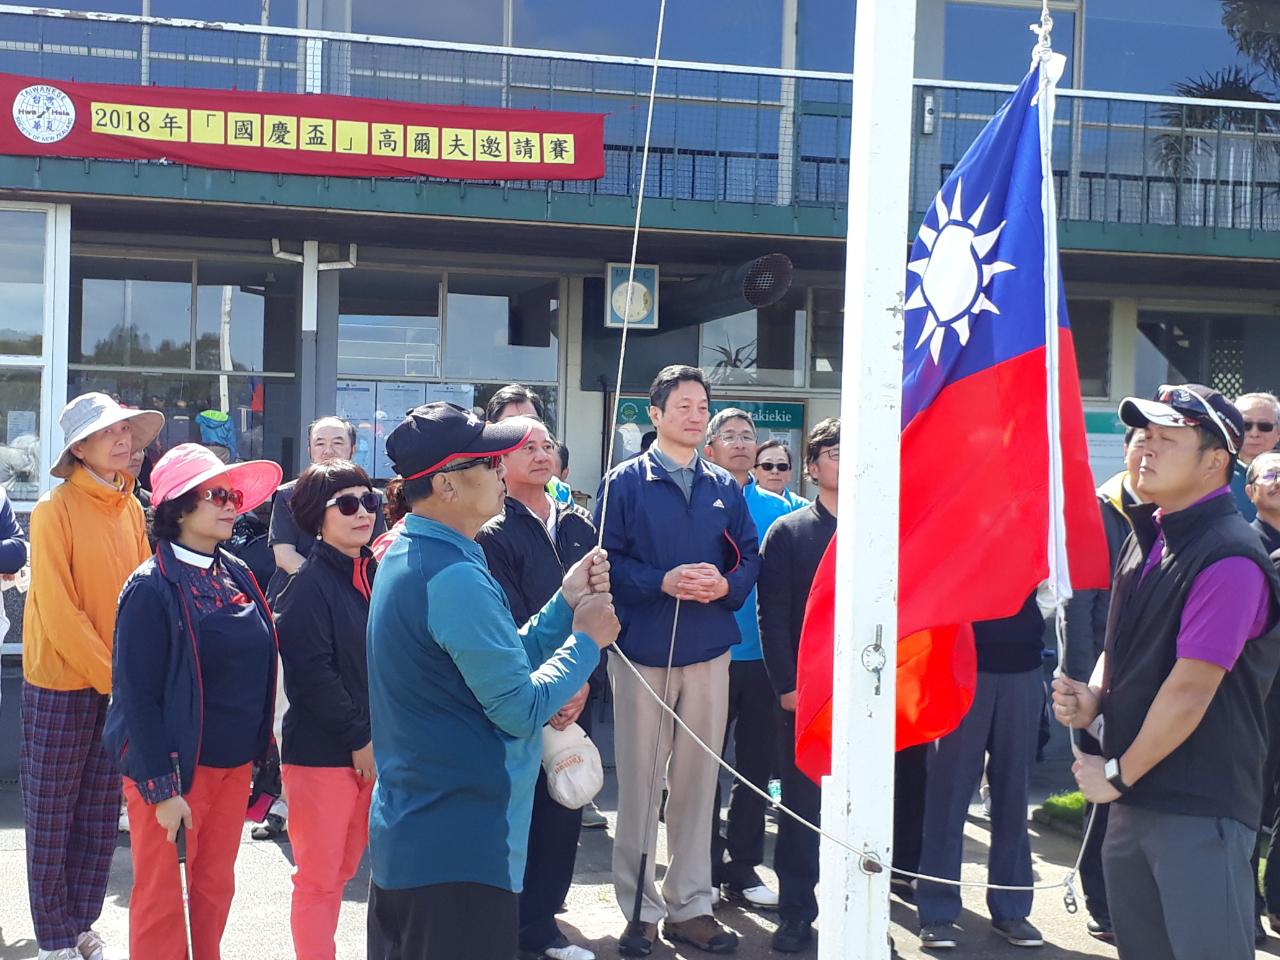 Dr.CHOU,Chung-Hsing, Director General of TECO in Auckland, attended the flag raising ceremony before the game started.